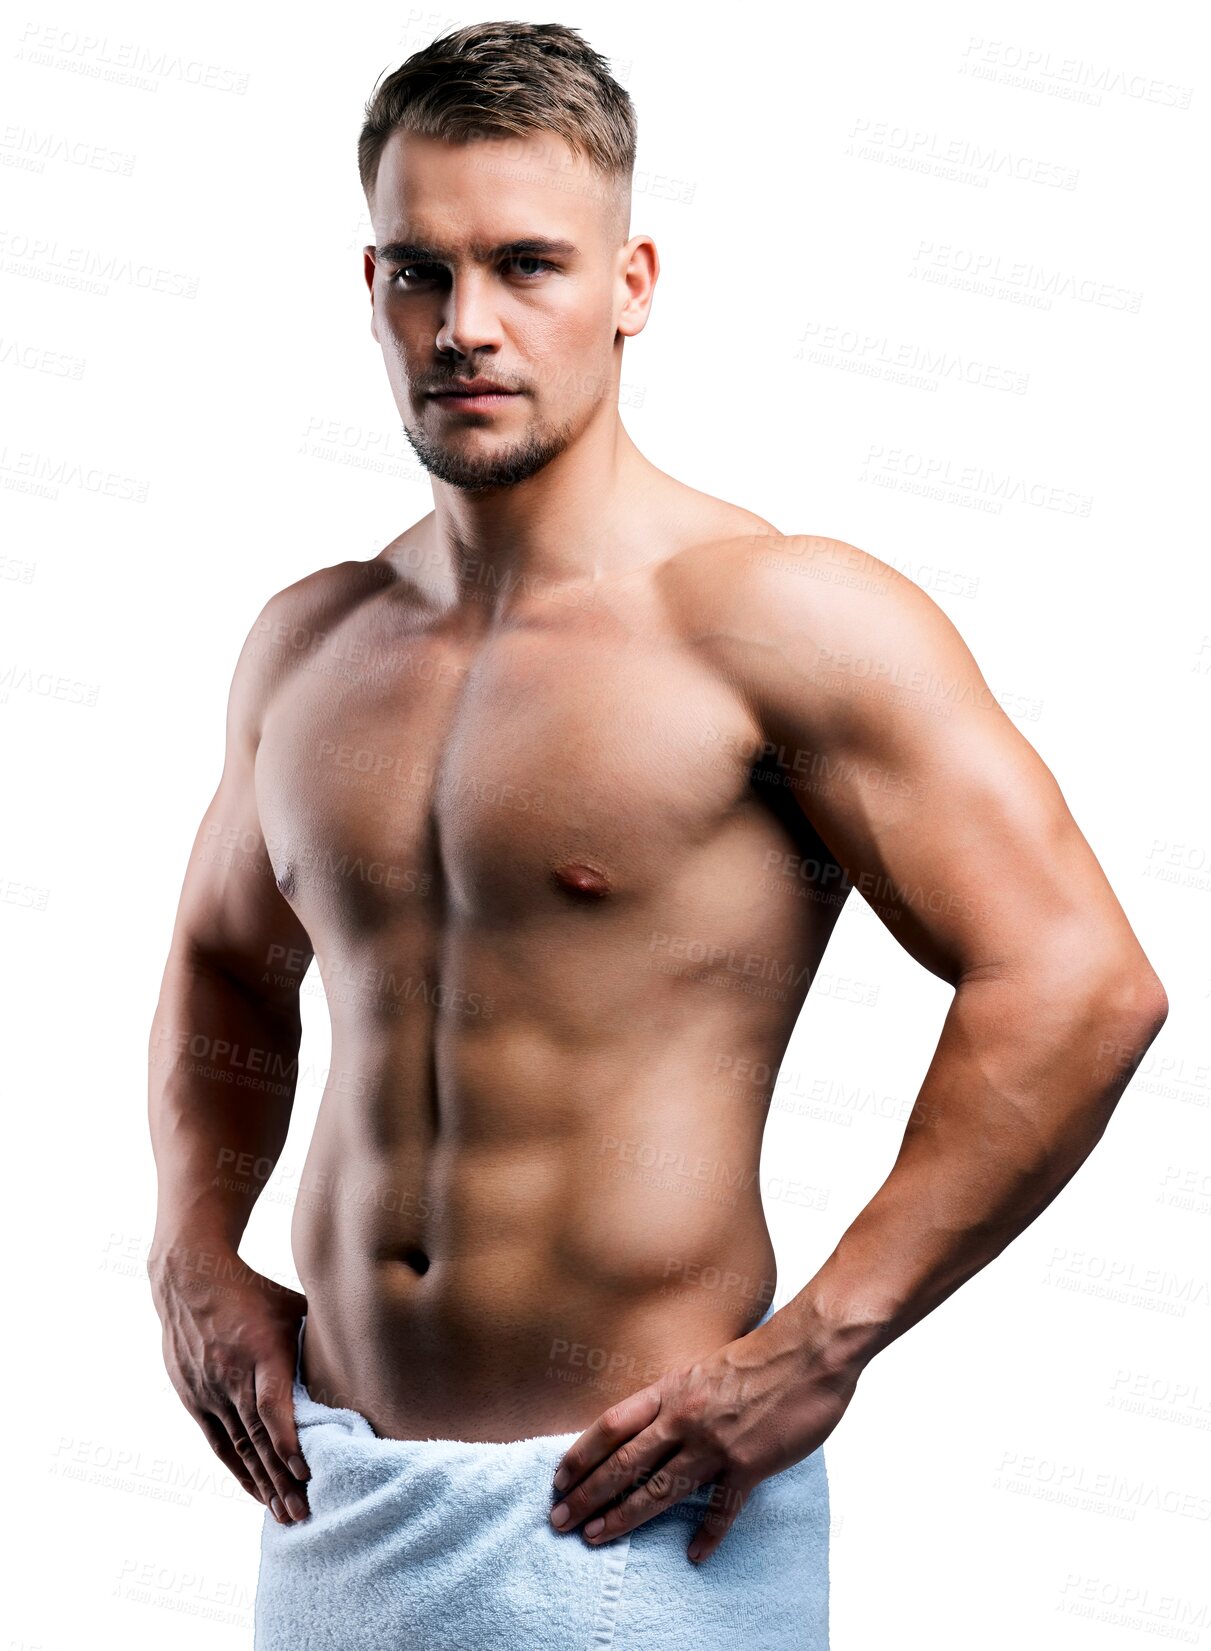 Buy stock photo Body, portrait and confident man in towel isolated on a transparent png background. Muscle, topless and serious male model with cloth after shower for exercise, workout or health, wellness and abs.